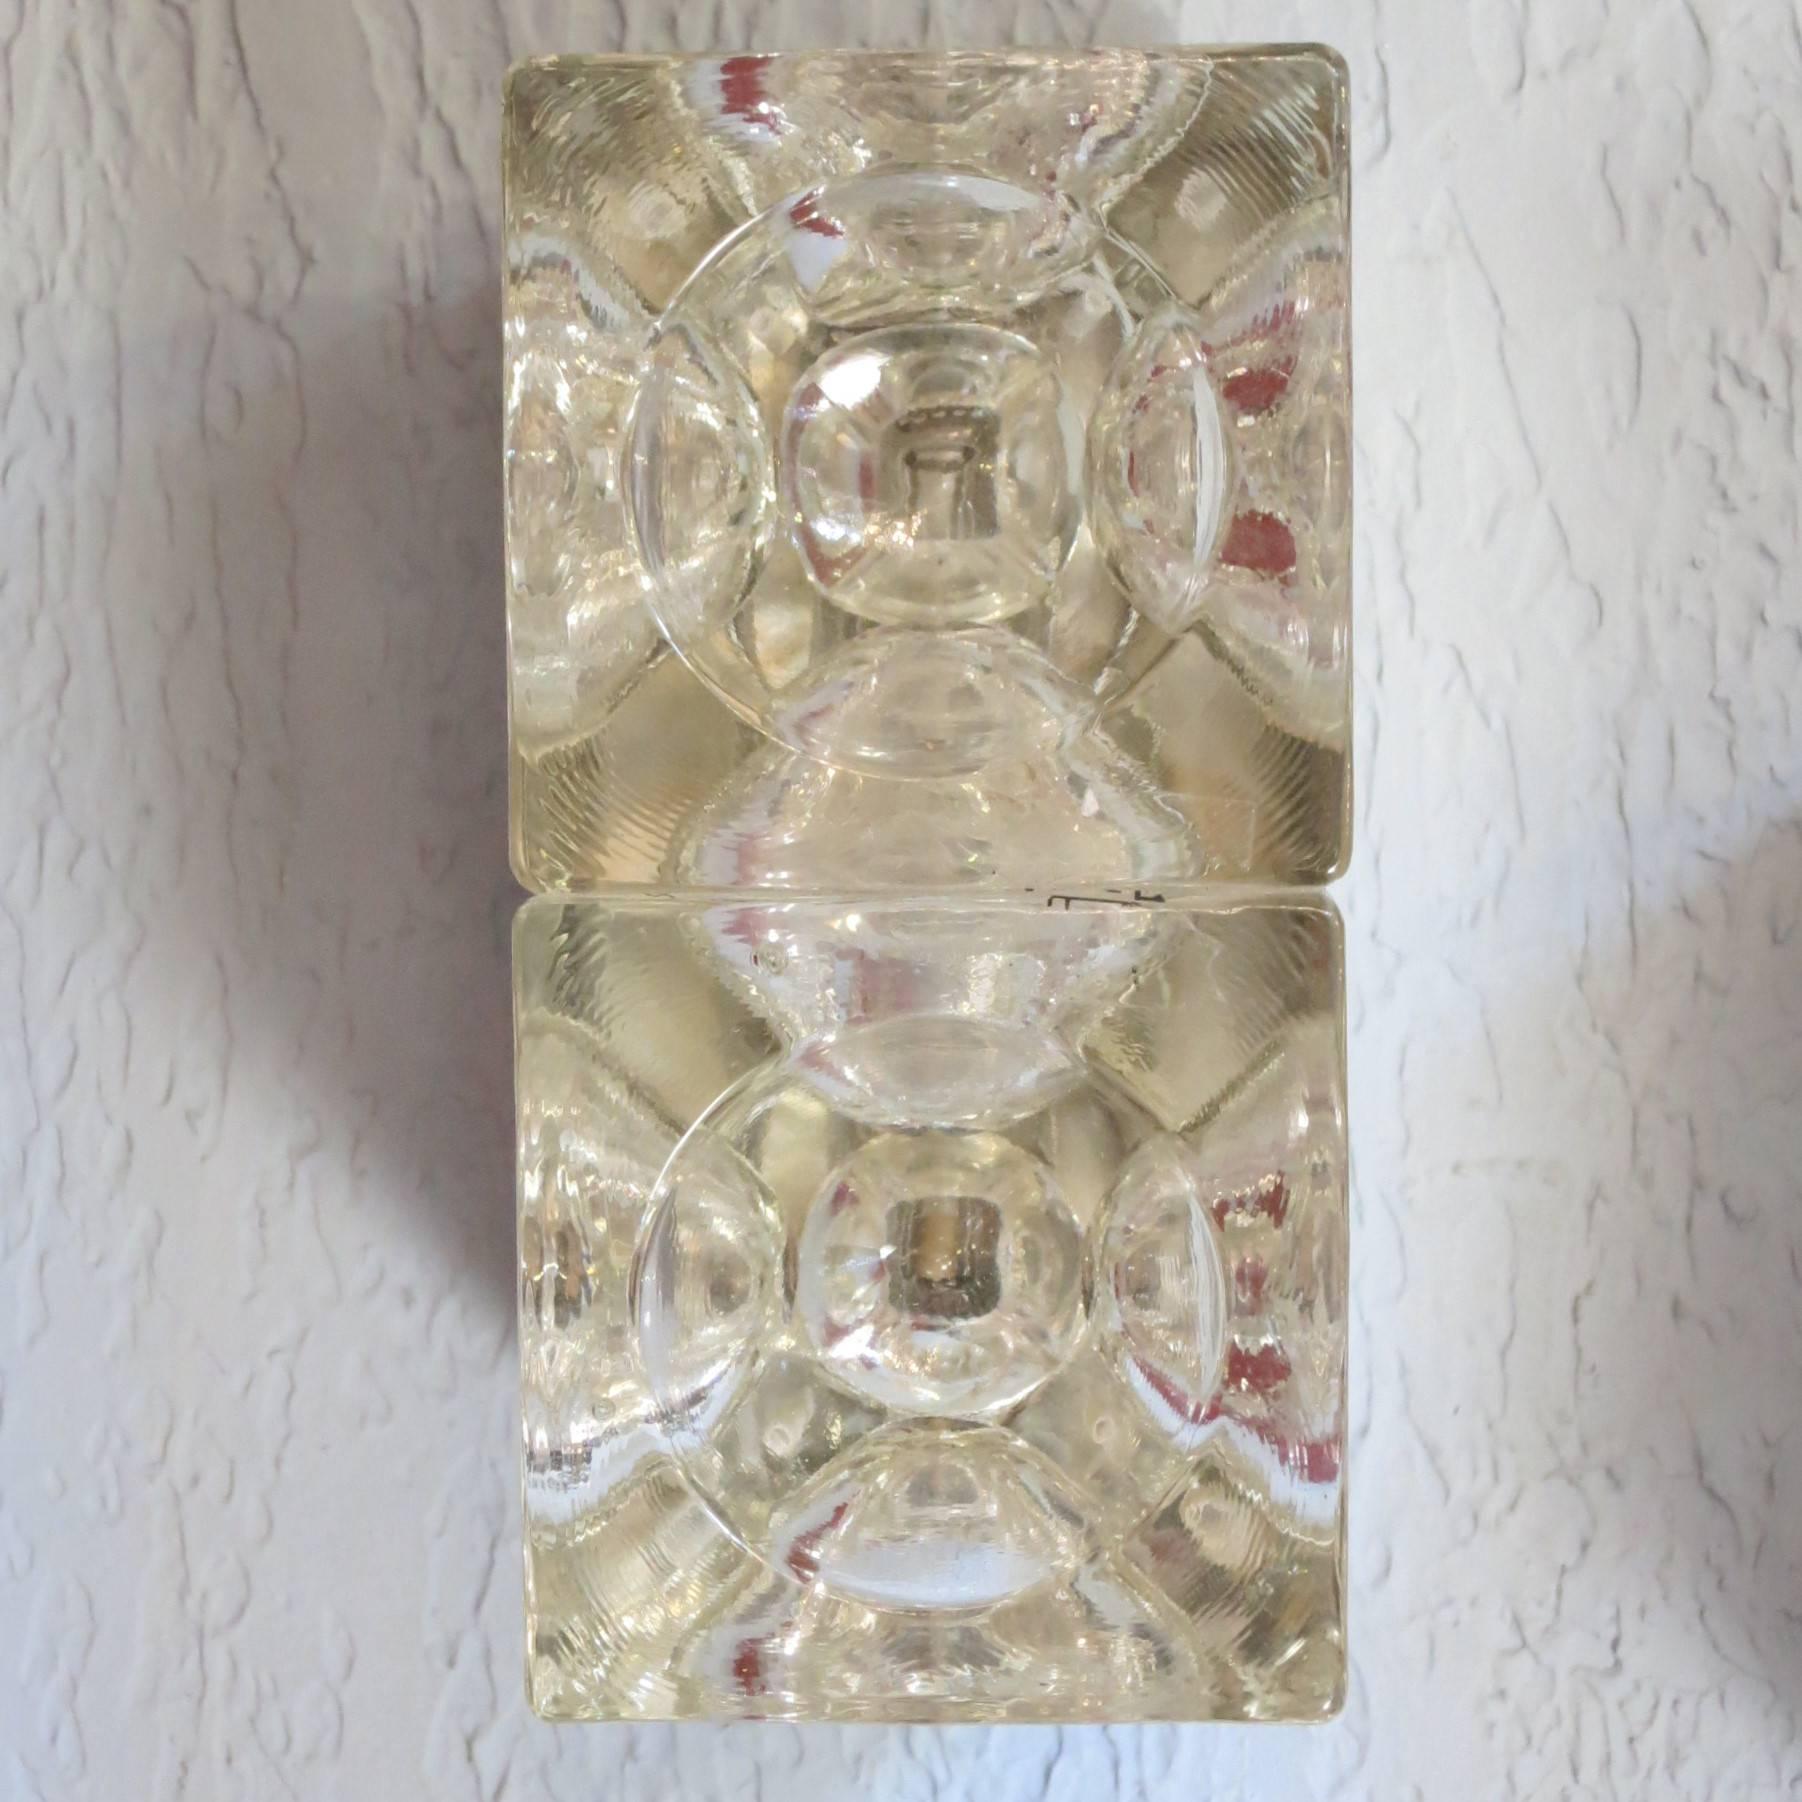 Italian Murano cube glass sconce or flush mount by Poliarte
Single light socket per sconce / wired for the U.S.